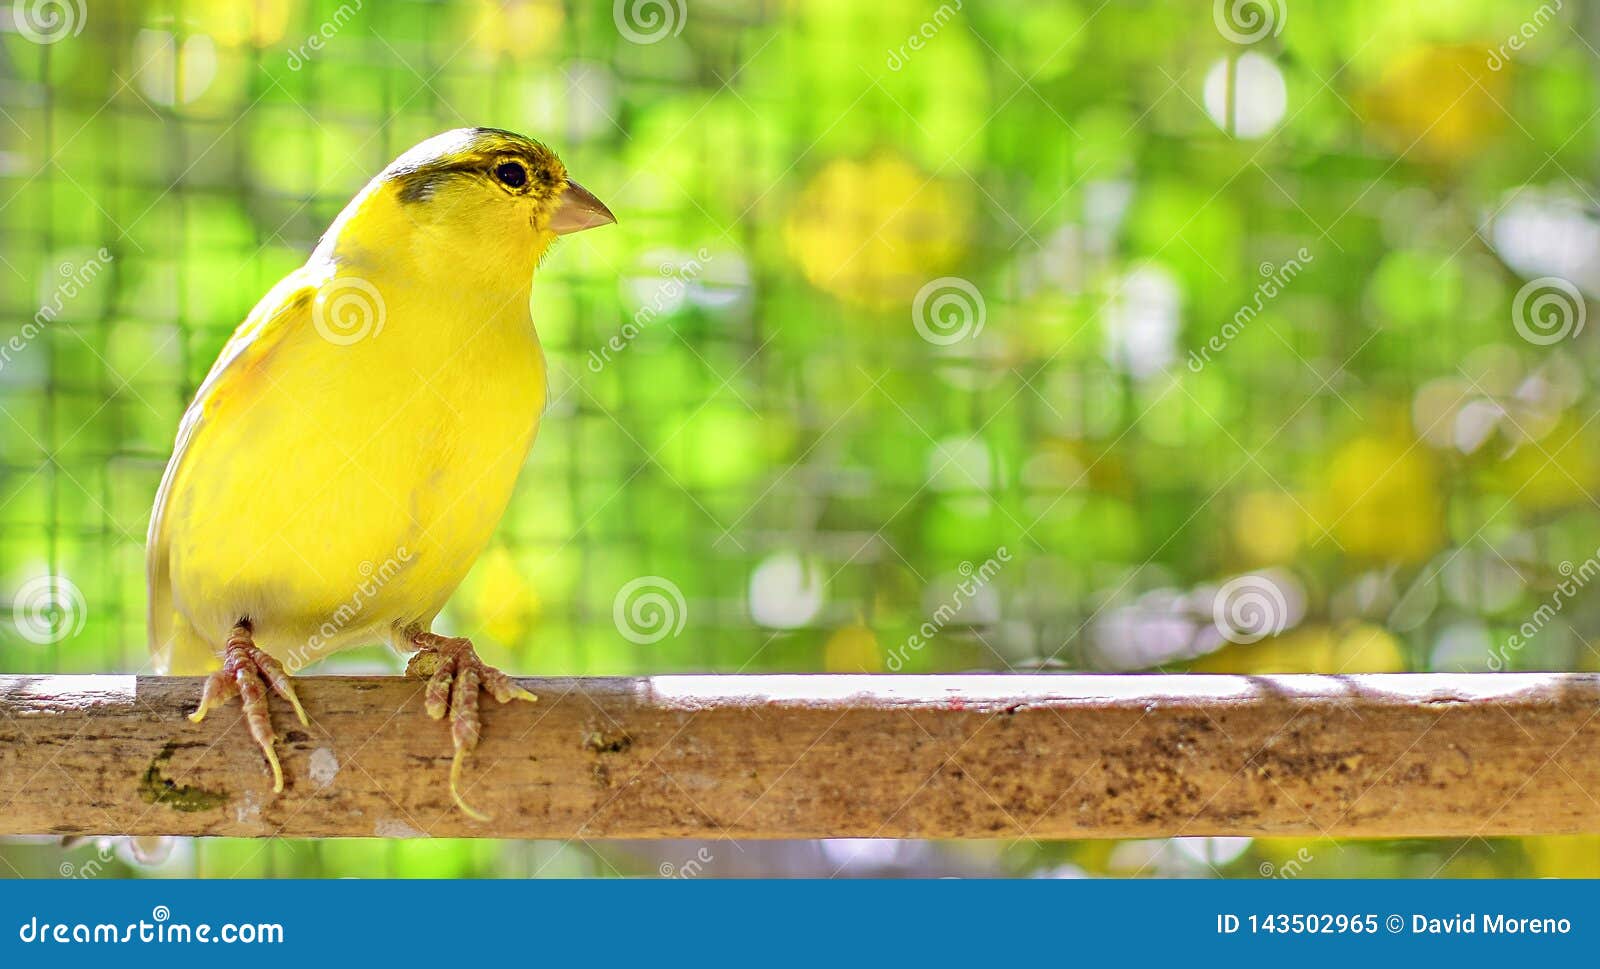 canary bird perched on a stick inside a cage